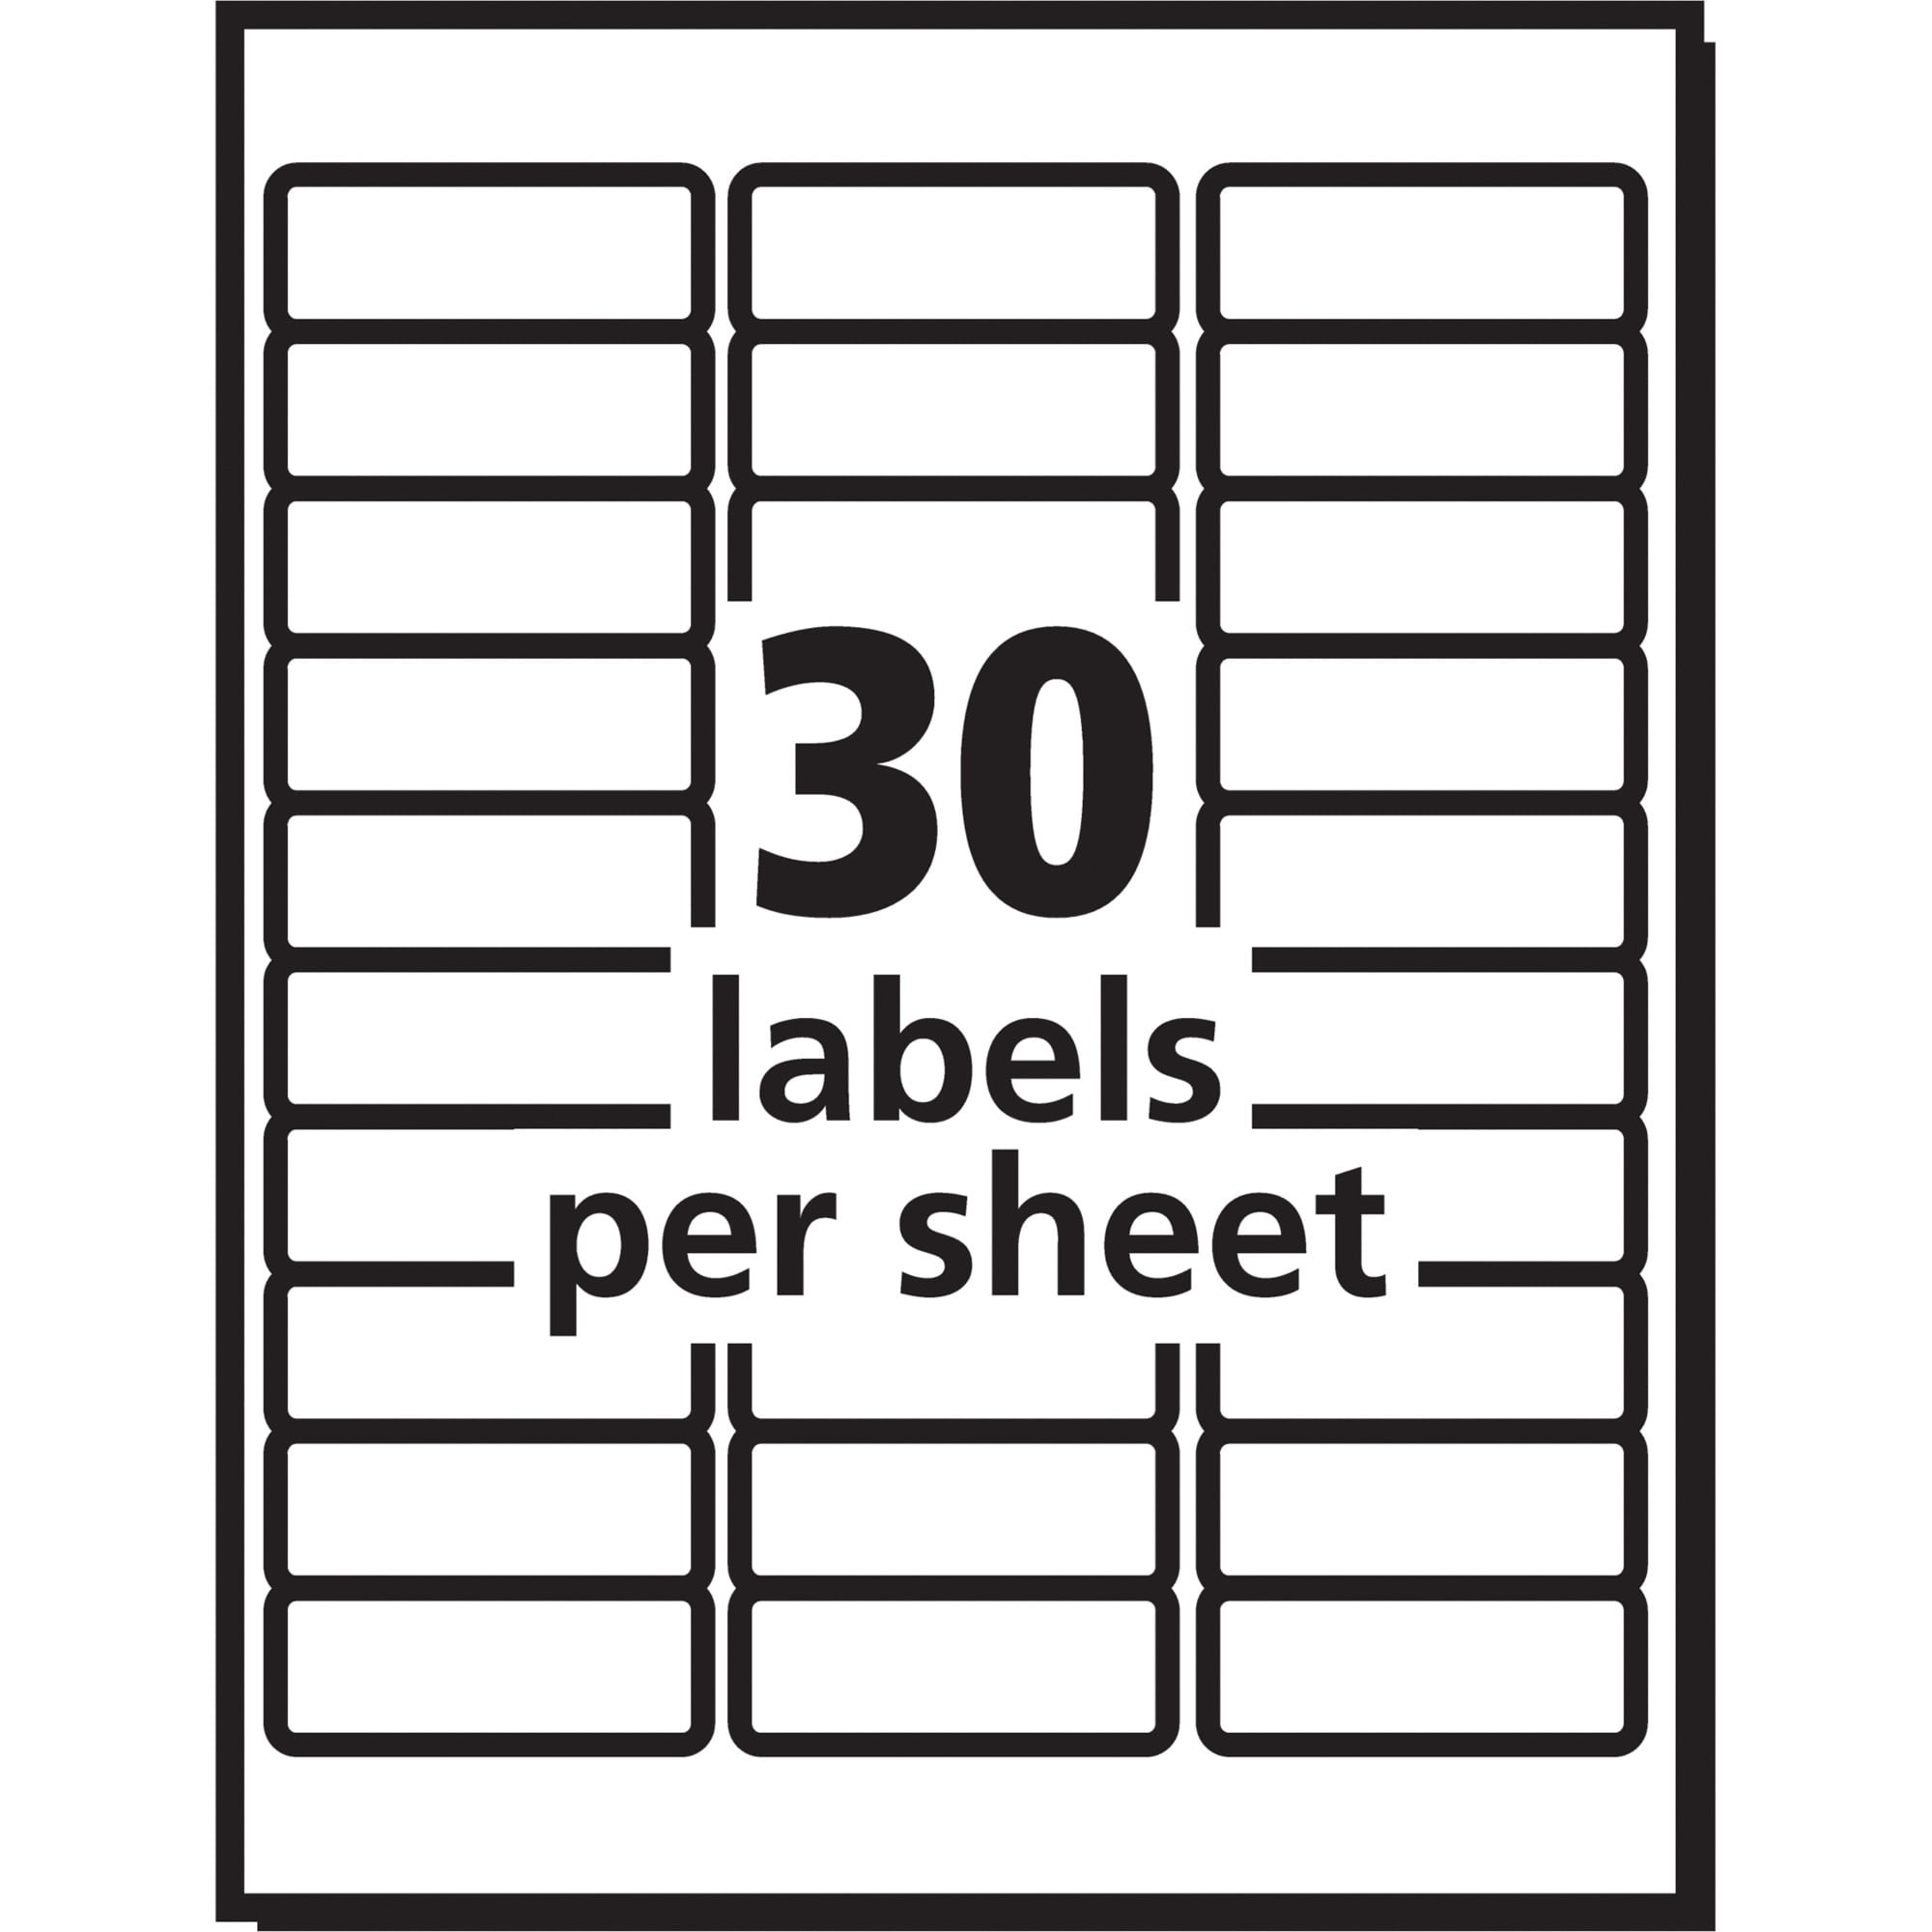 22 Odul 22a Label Template - Labels For Your Ideas Intended For Office Depot Label Templates